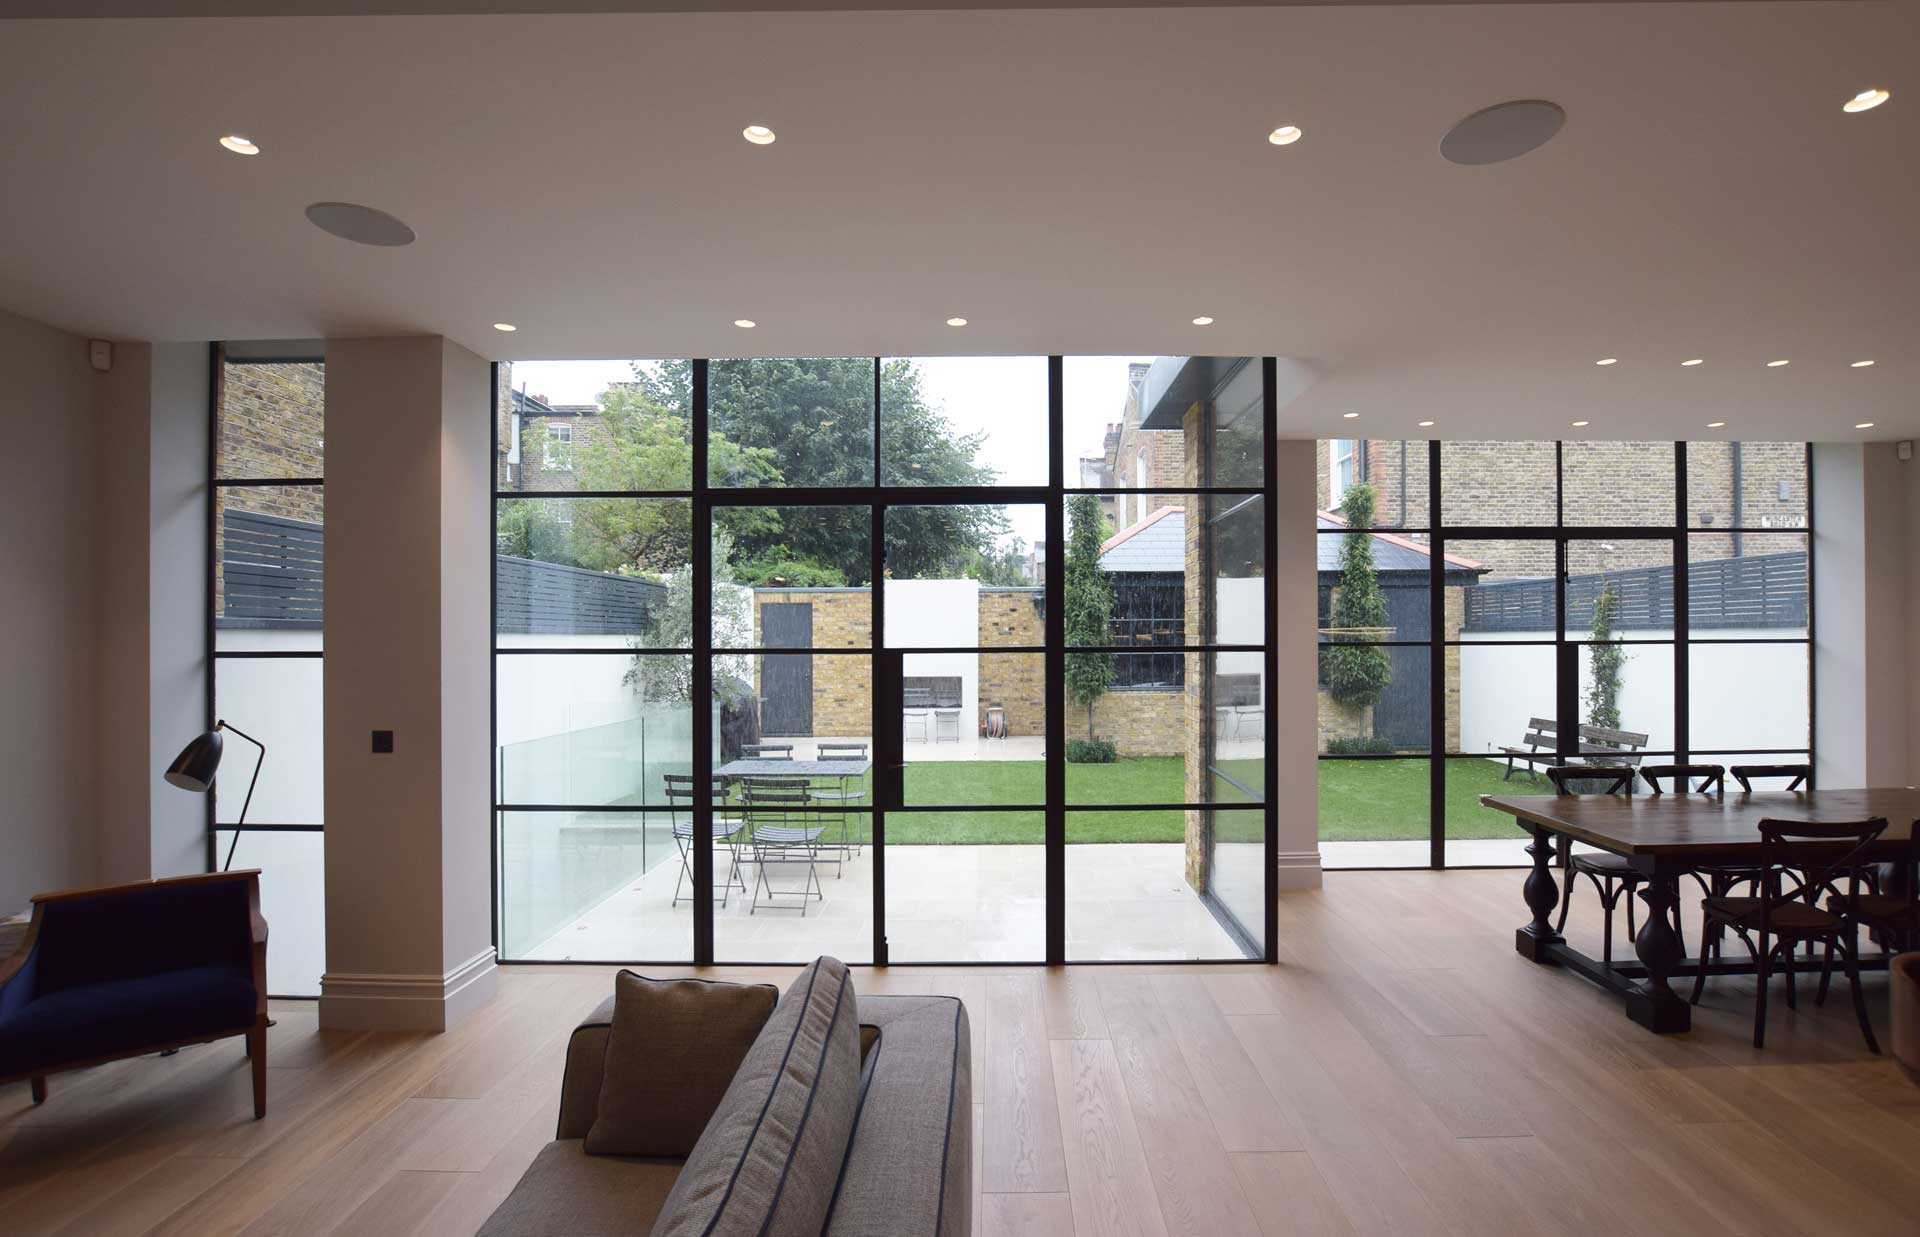 Clapham Common Westside Wandsworth Whole House Refurbishment, Extension And New Basement 08